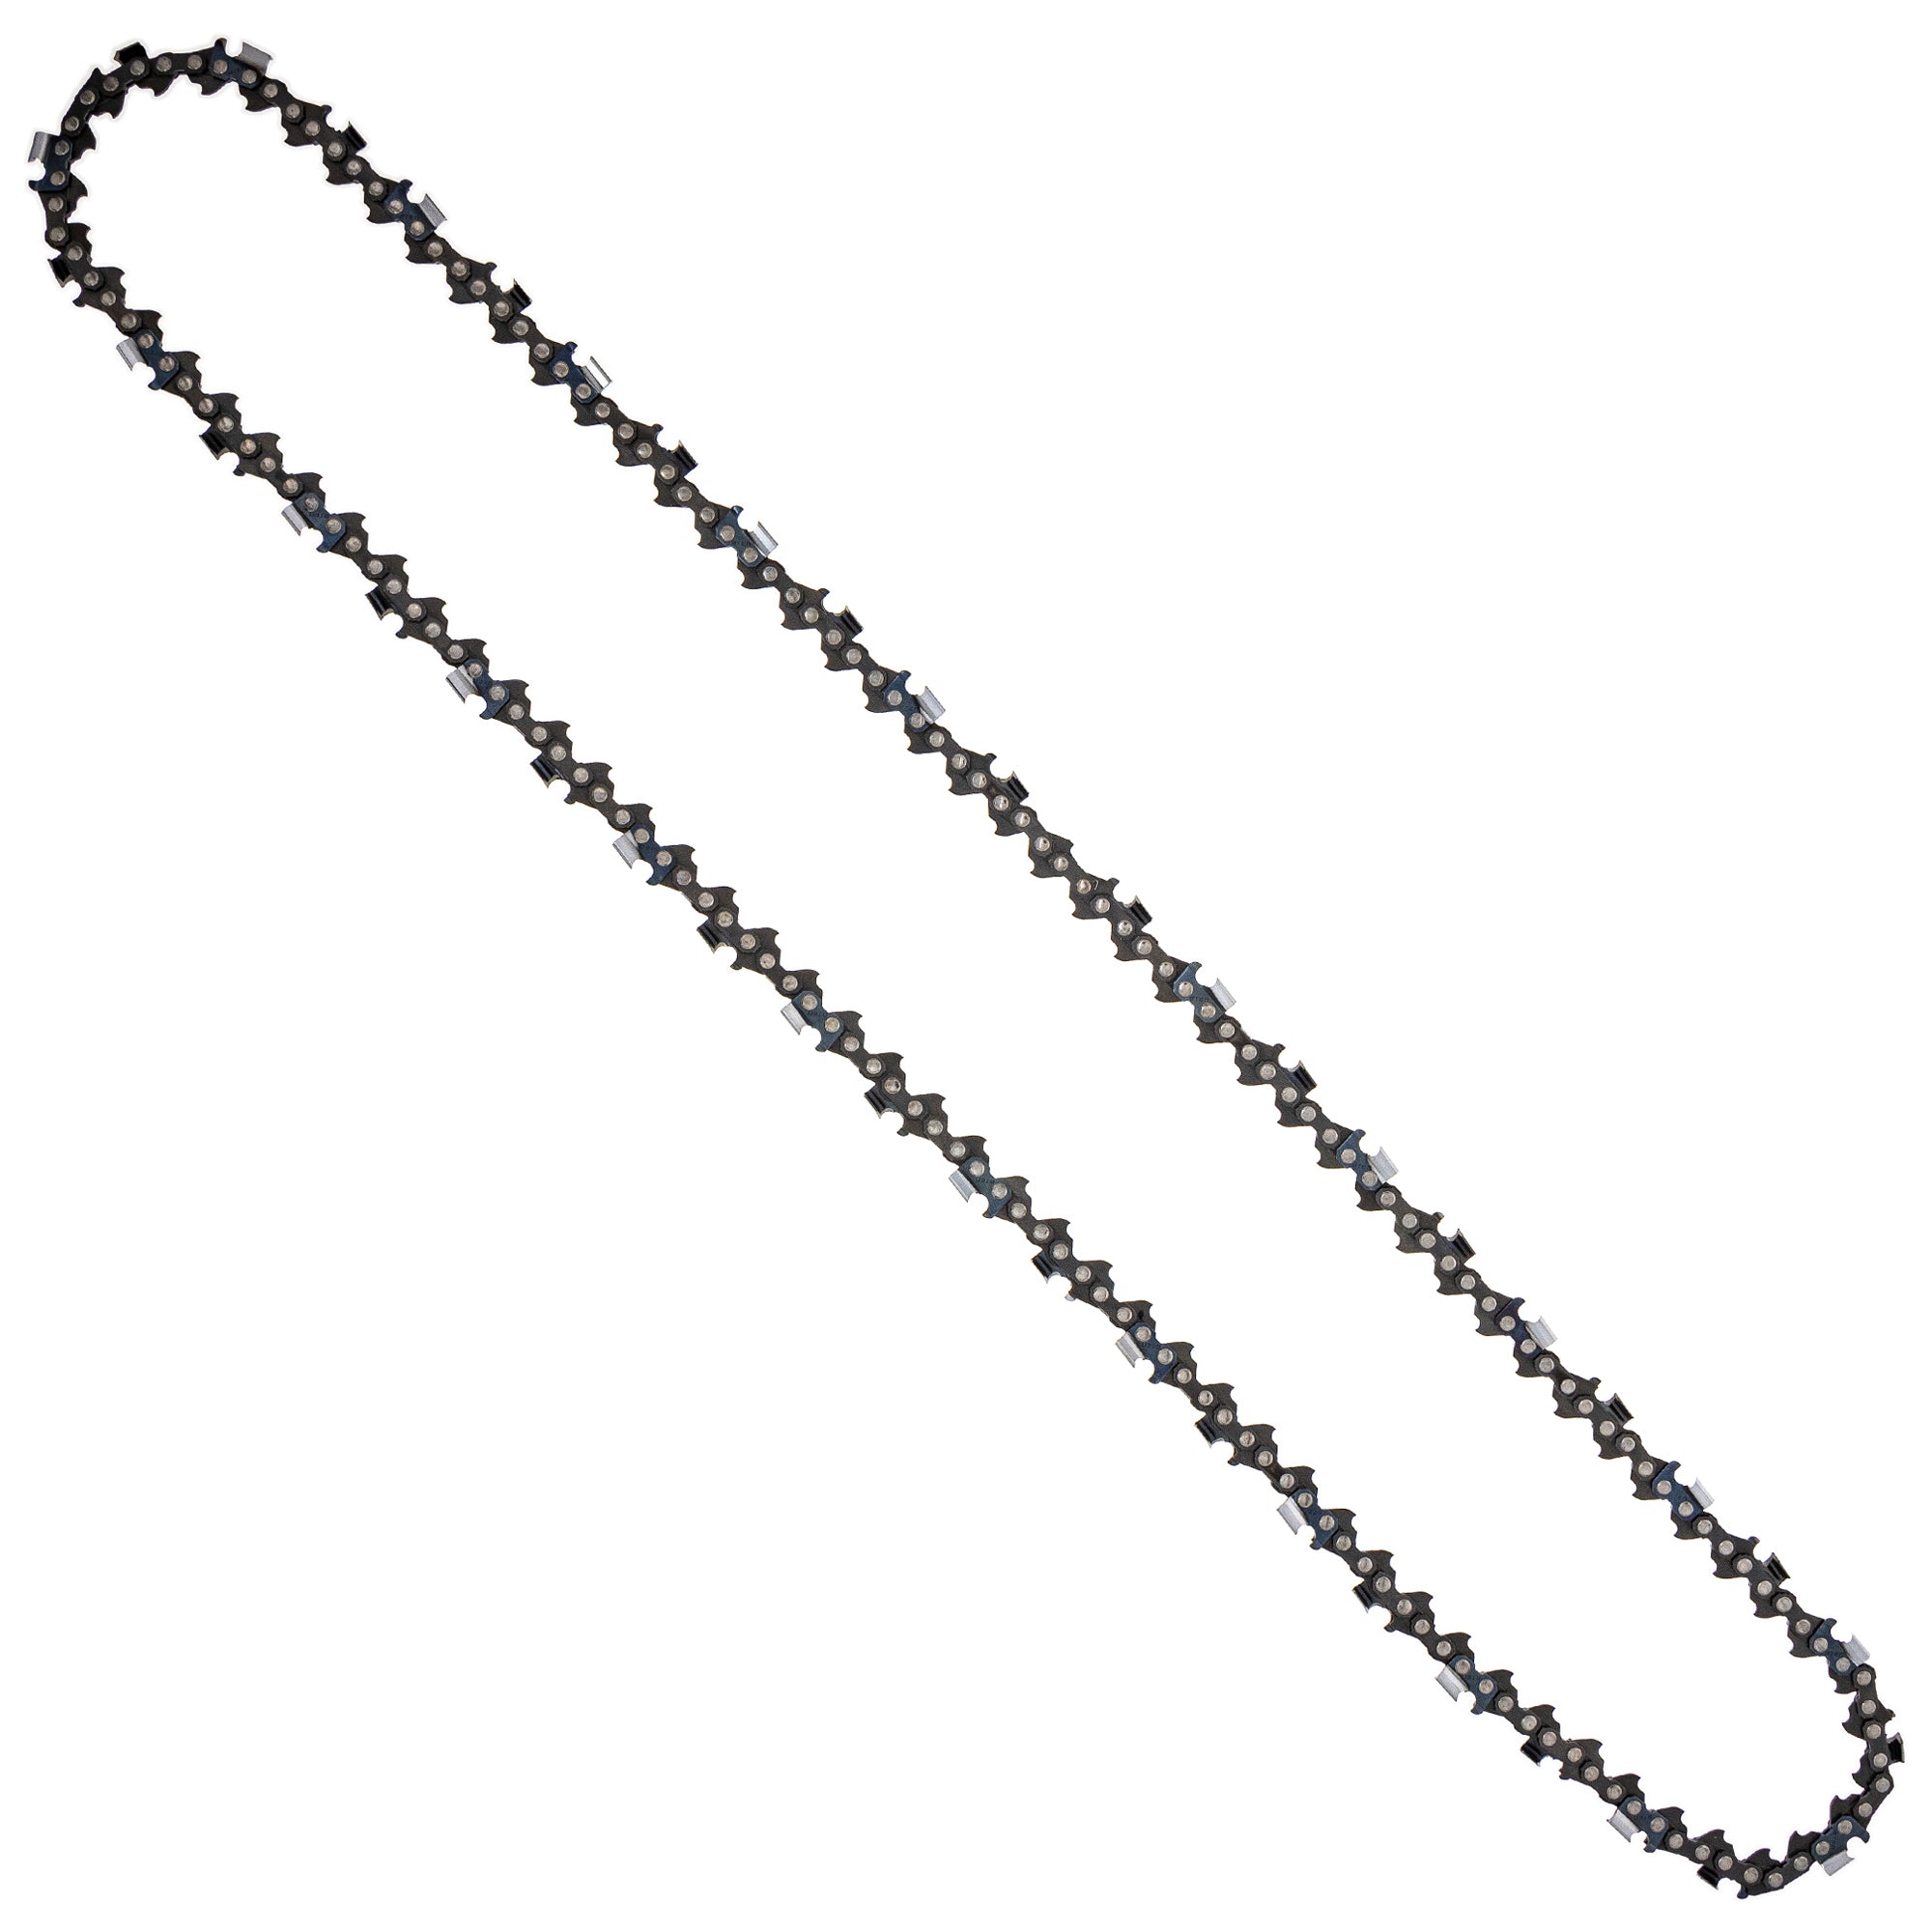 8TEN 810-CCC2352H Chain 6-Pack for zOTHER Oregon MS 066 064 056